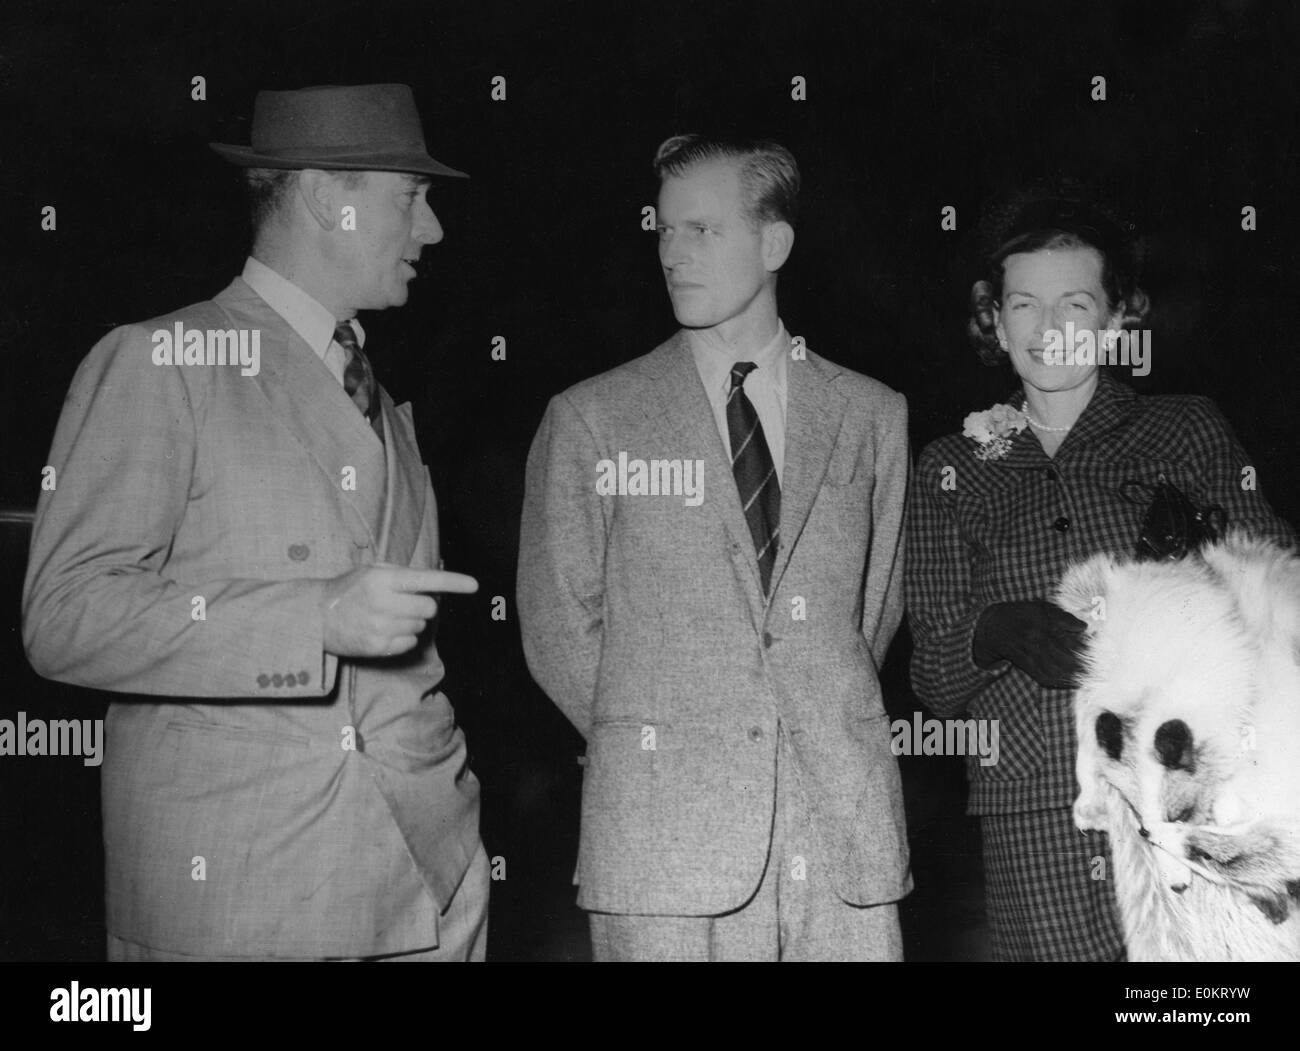 Oct. 18, 1949 - Malta - PRINCE PHILIP, Duke of Edinburgh arrives in Malta with his moth Lady MOUNTBATTEN to take up a naval appointment. They are greeted by Lord LOUIS MOUNTBATTEN. Stock Photo